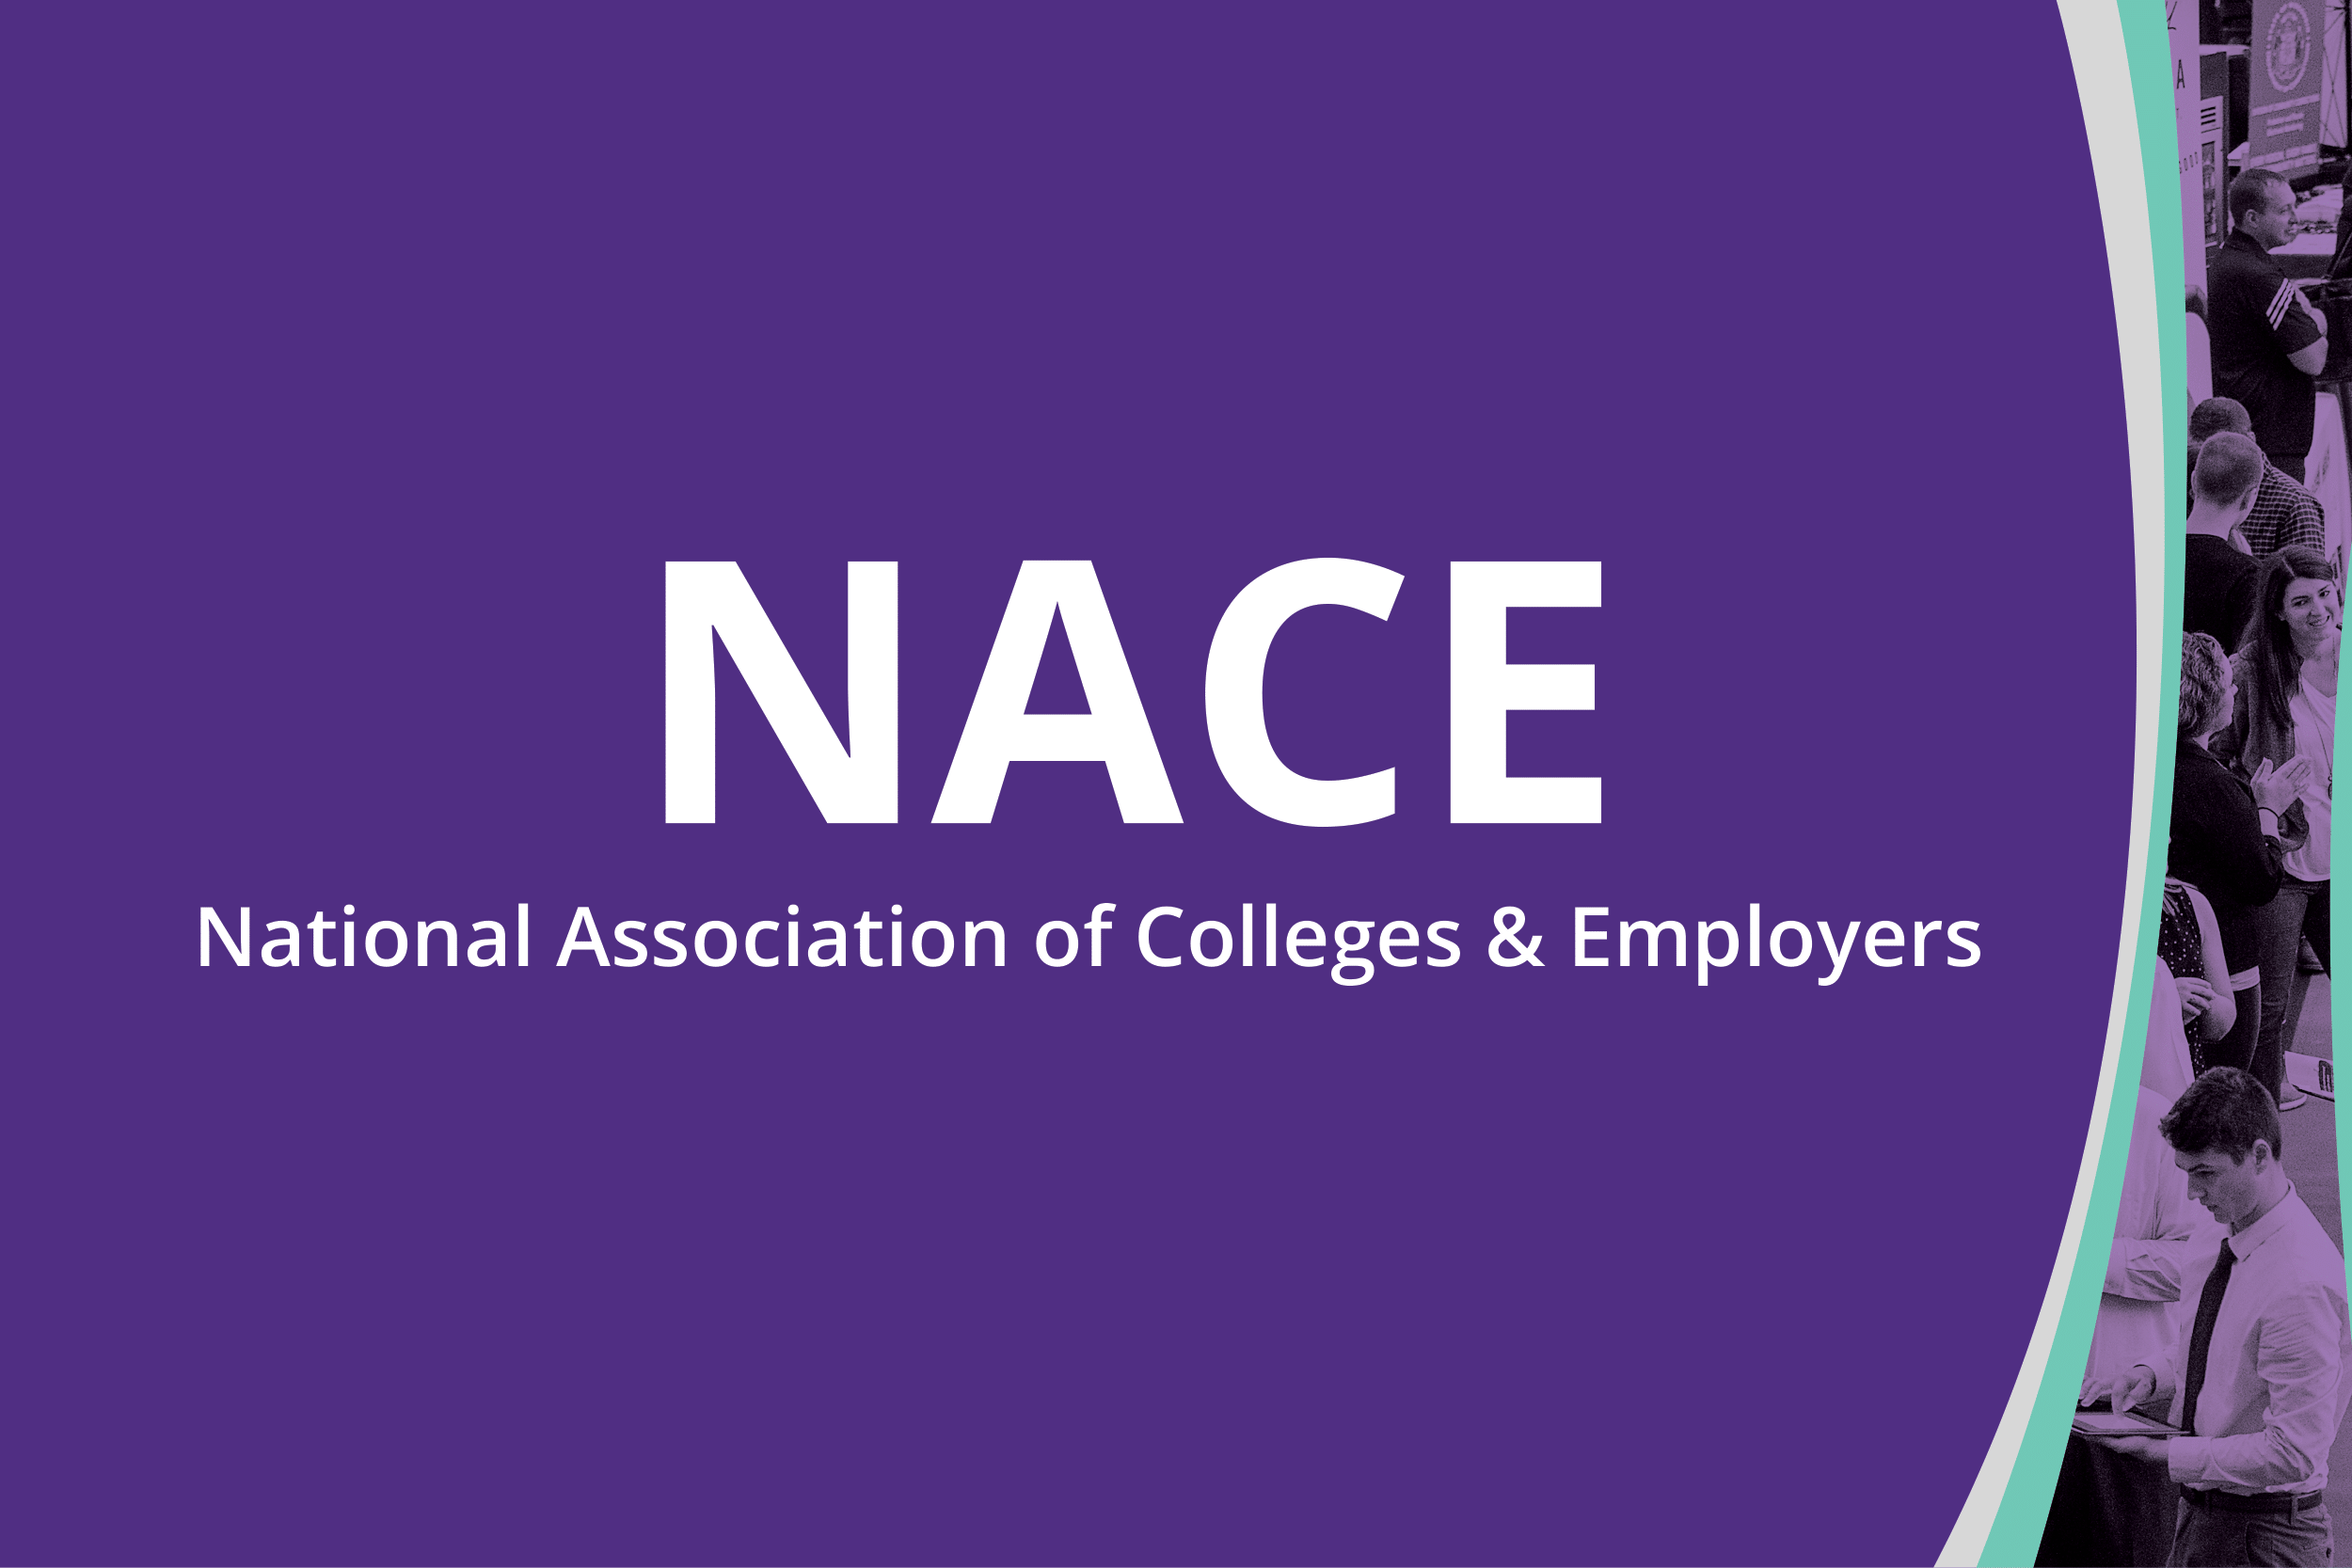 NACE National Association of Colleges & Employers